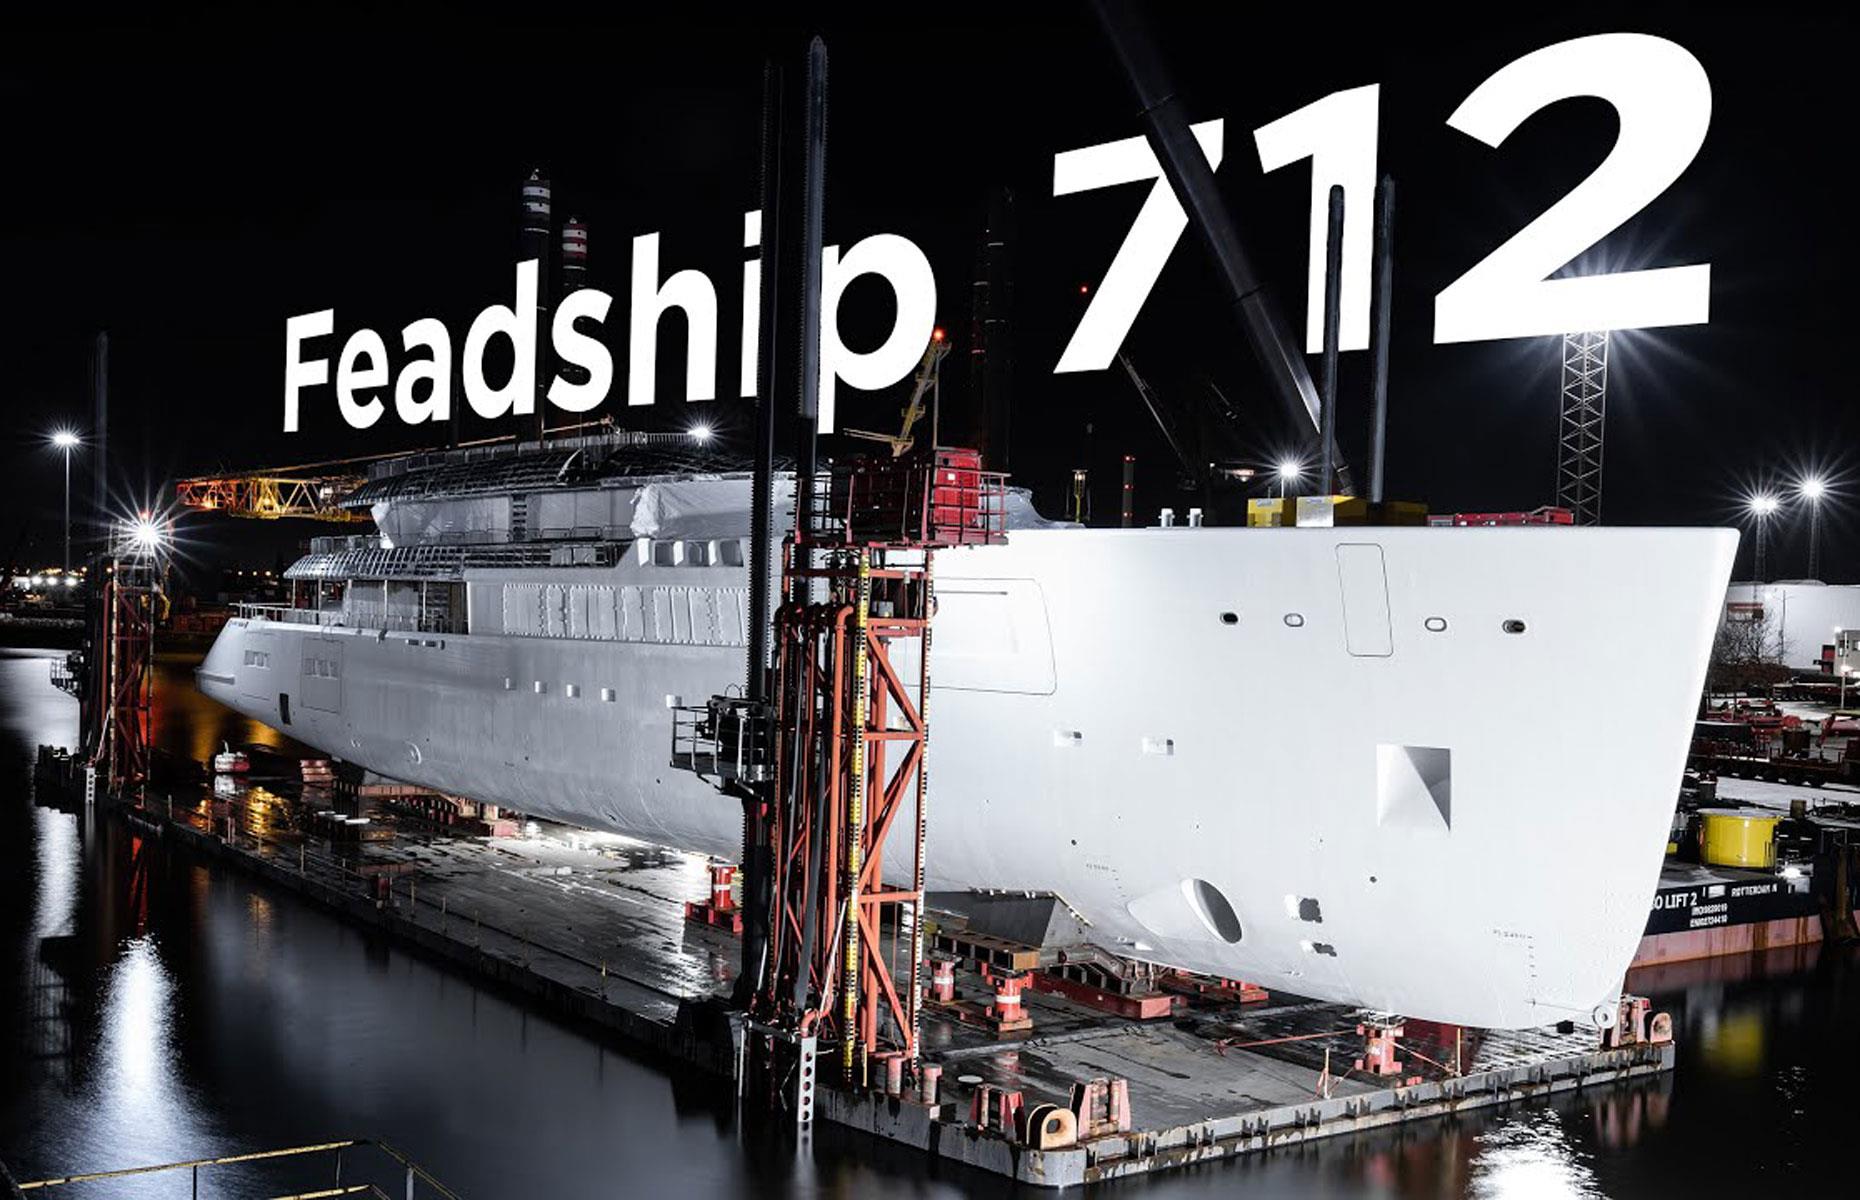 <p>Feadship is practically churning out superyachts at the moment, with multiple deliveries scheduled this year. <em>Project 712 </em>is among them.</p>  <p>The 272-foot (83m) vessel features an exterior design by Feadship's De Voogt Naval Architects. Unlike the aforementioned<em> Project 825</em>, however, the interiors are the work of top Dutch firm Sinot Yacht Architecture & Design, not French studio Gilles & Boissier.</p>